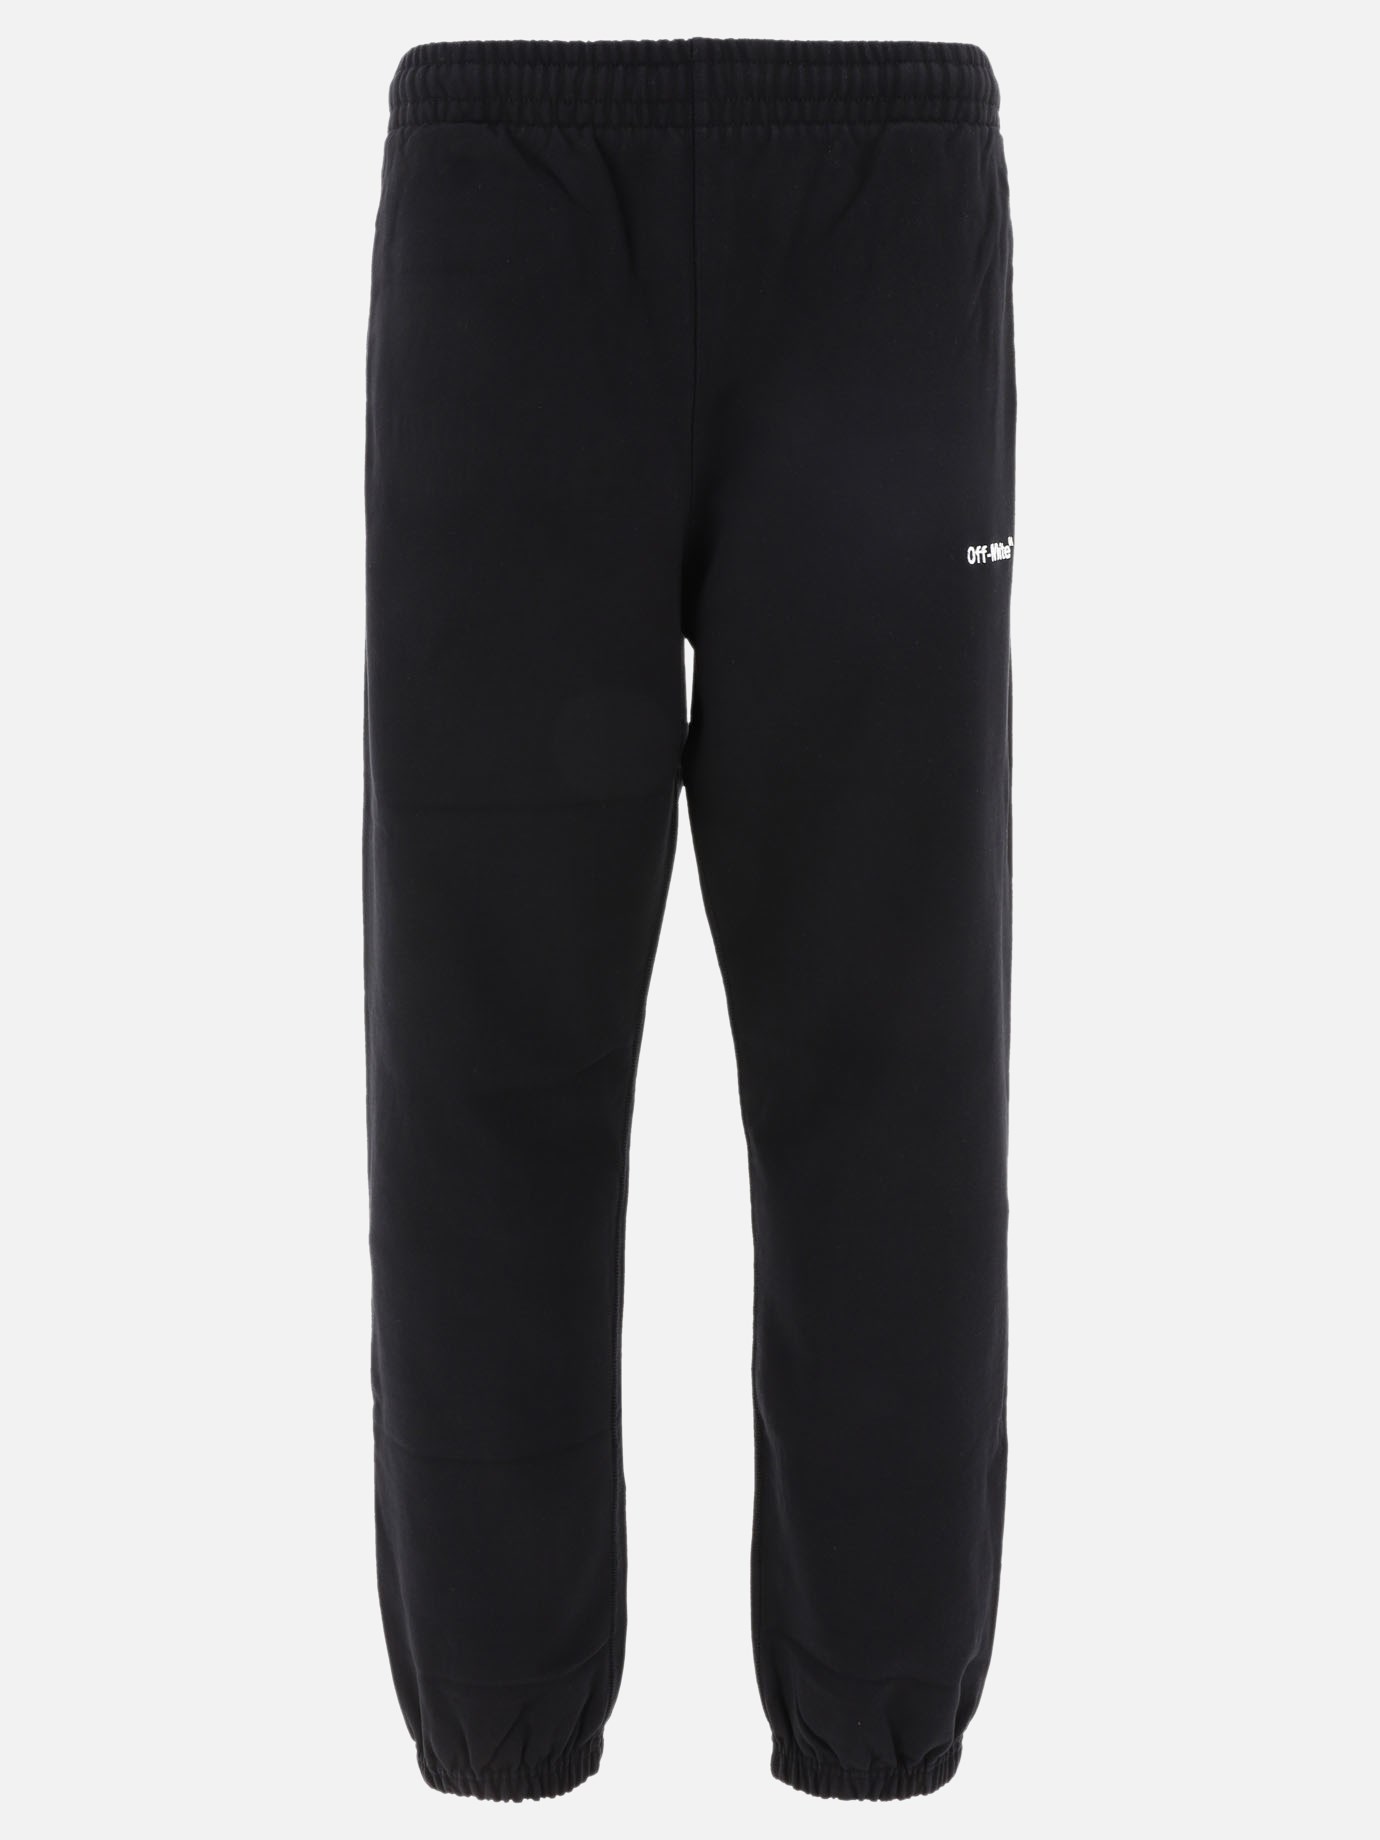 Jogger  For All Slim  by Off-White